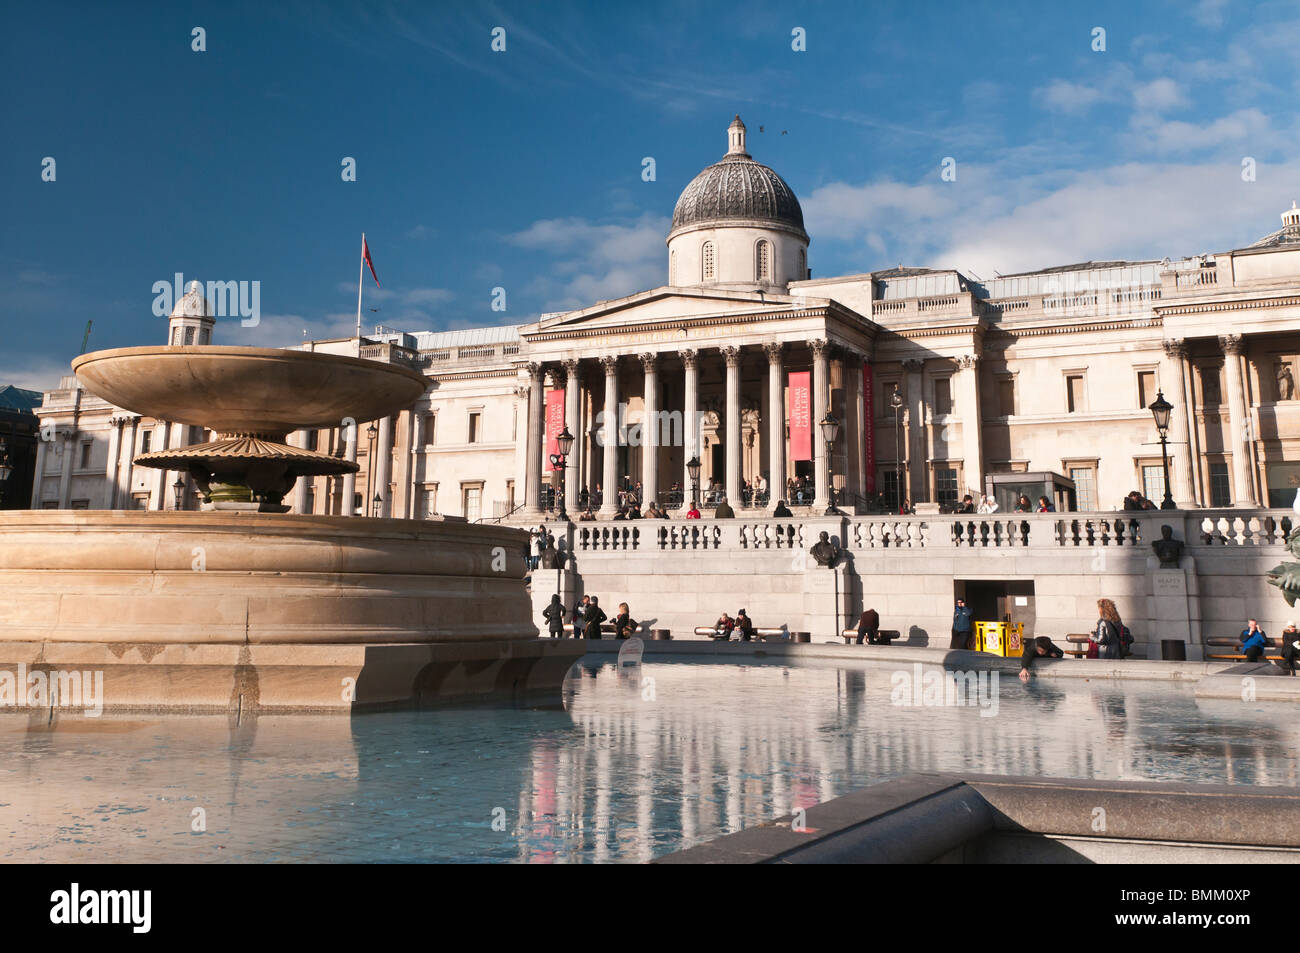 The National Gallery in winter with frozen fountain, Trafalgar Square, London, United Kingdom Stock Photo